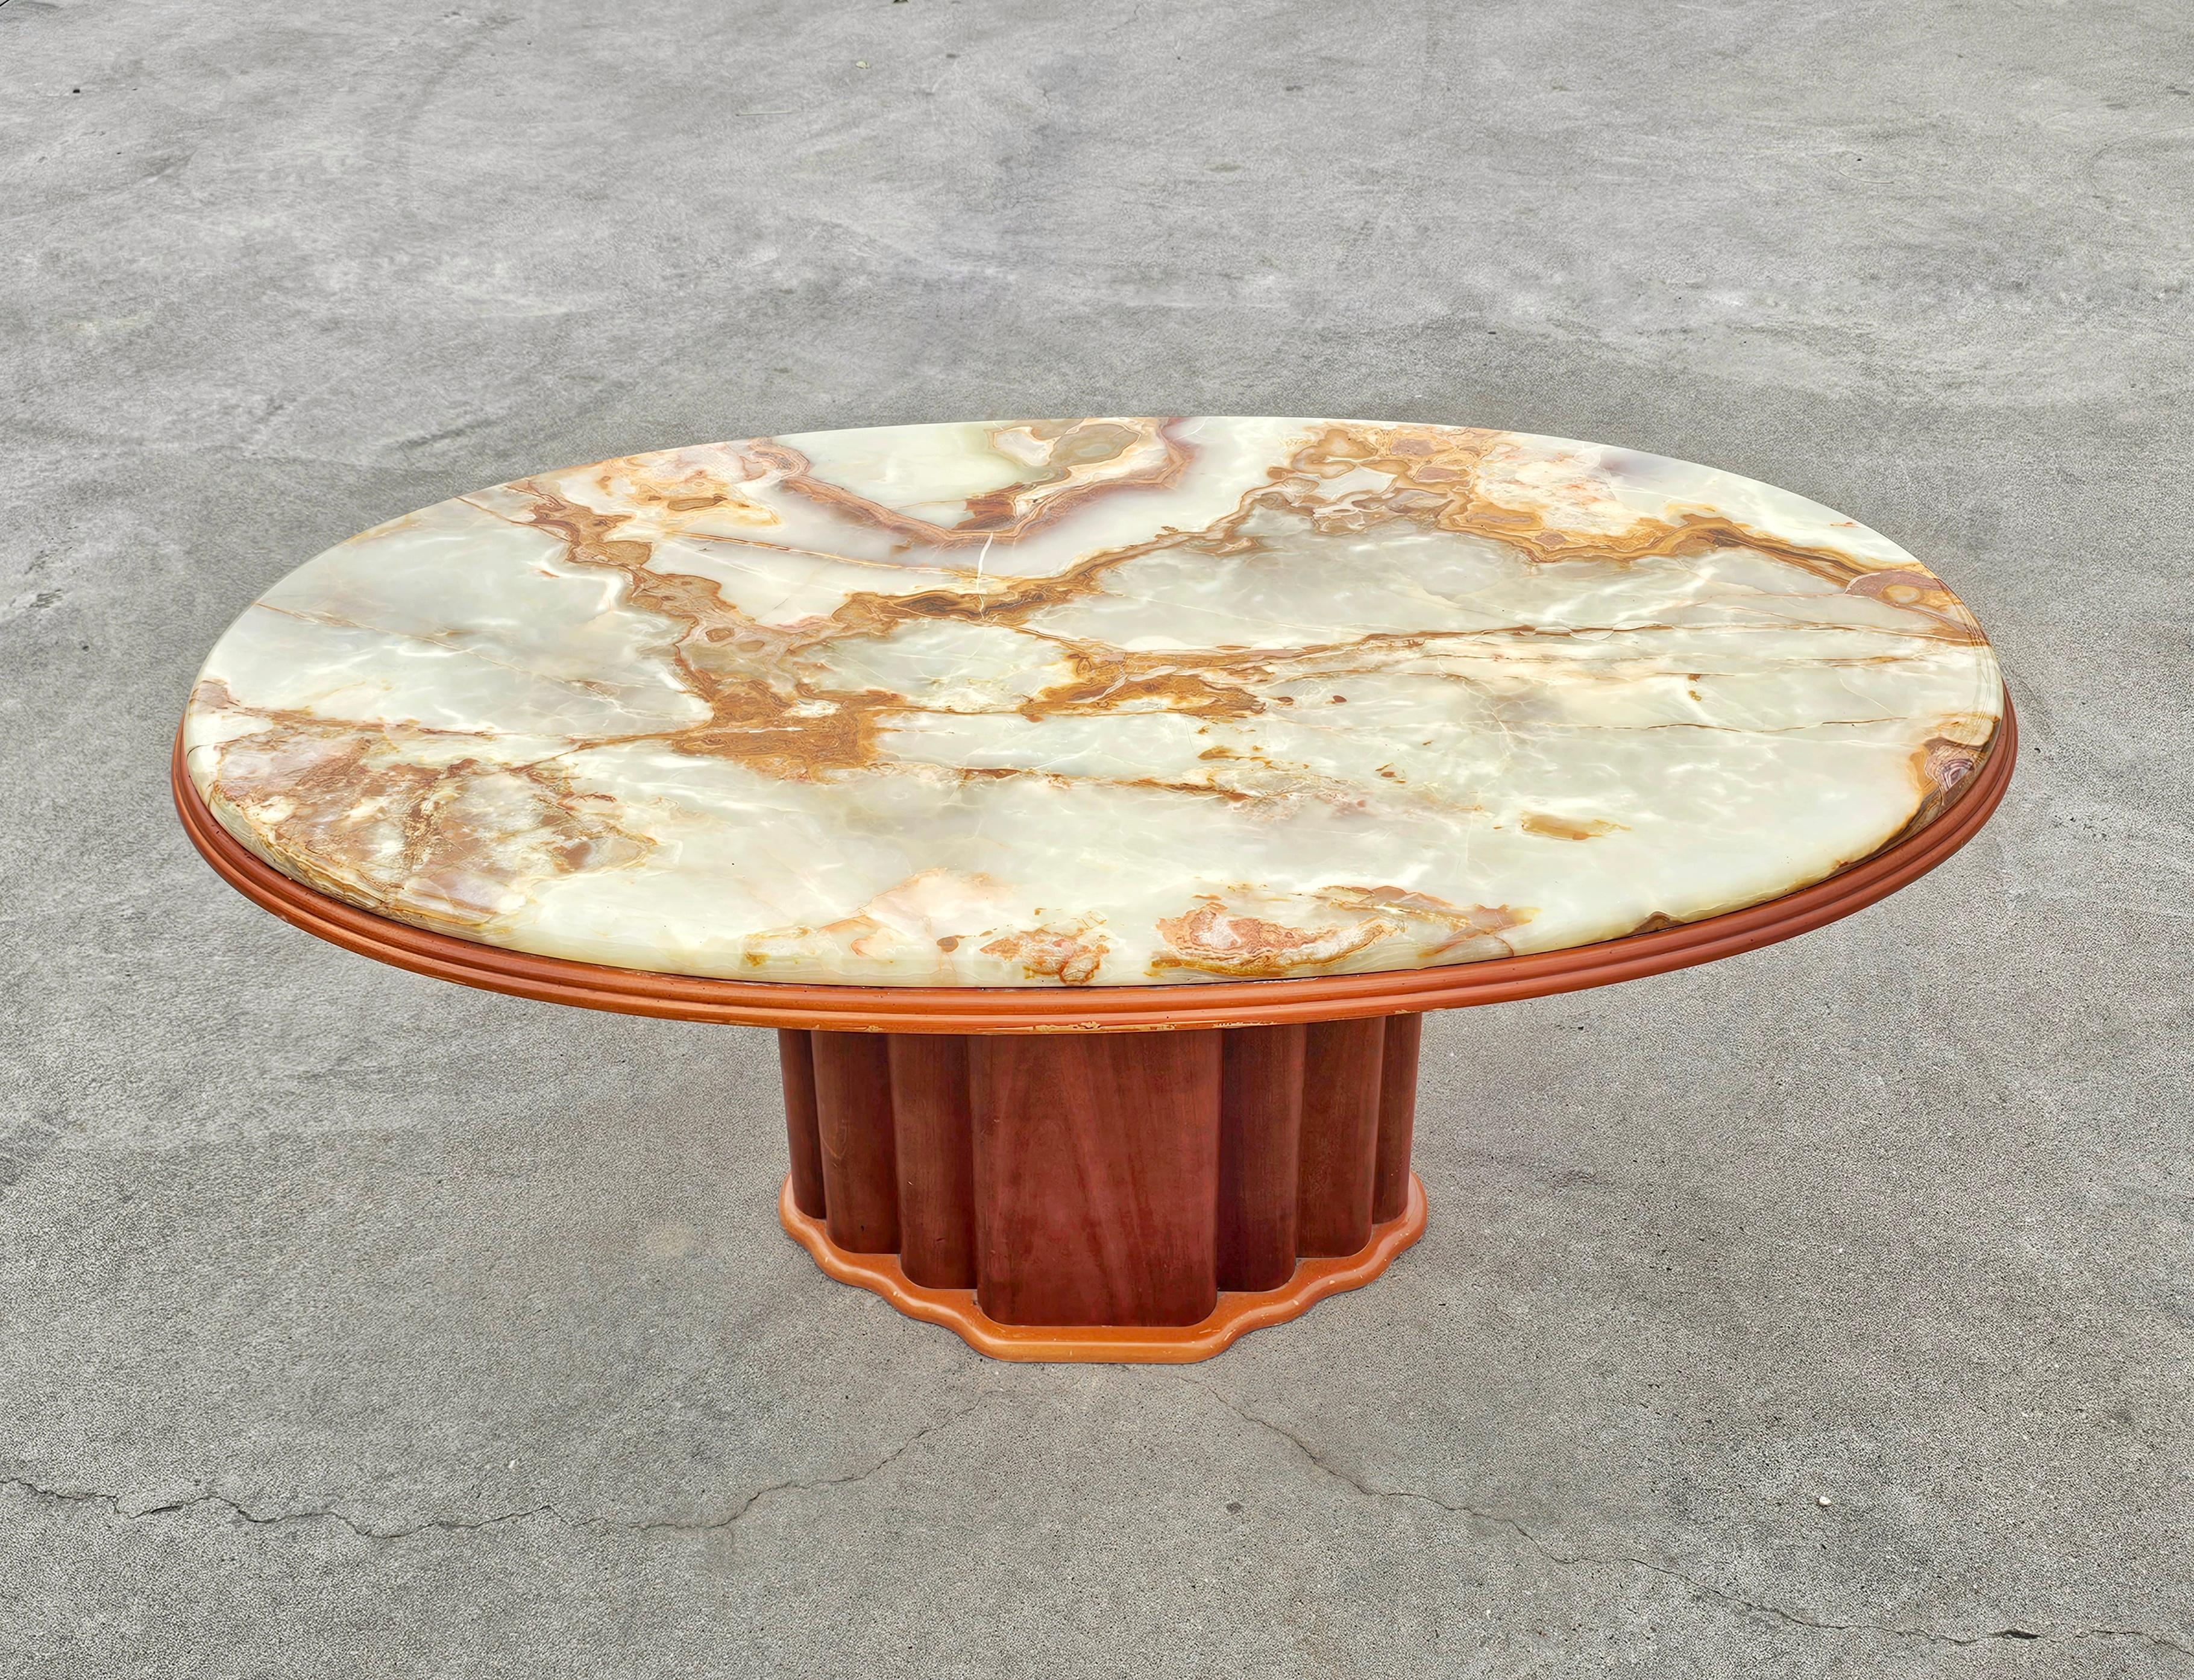 In this listing you will find an absolutely stunning Art Deco inspired coffee table. It features wooden base done in cherry wood with a gorgeous top done in Onyx marble with rich golden veins. Manufactured by Hohnert Design in West Germany in 1970s.